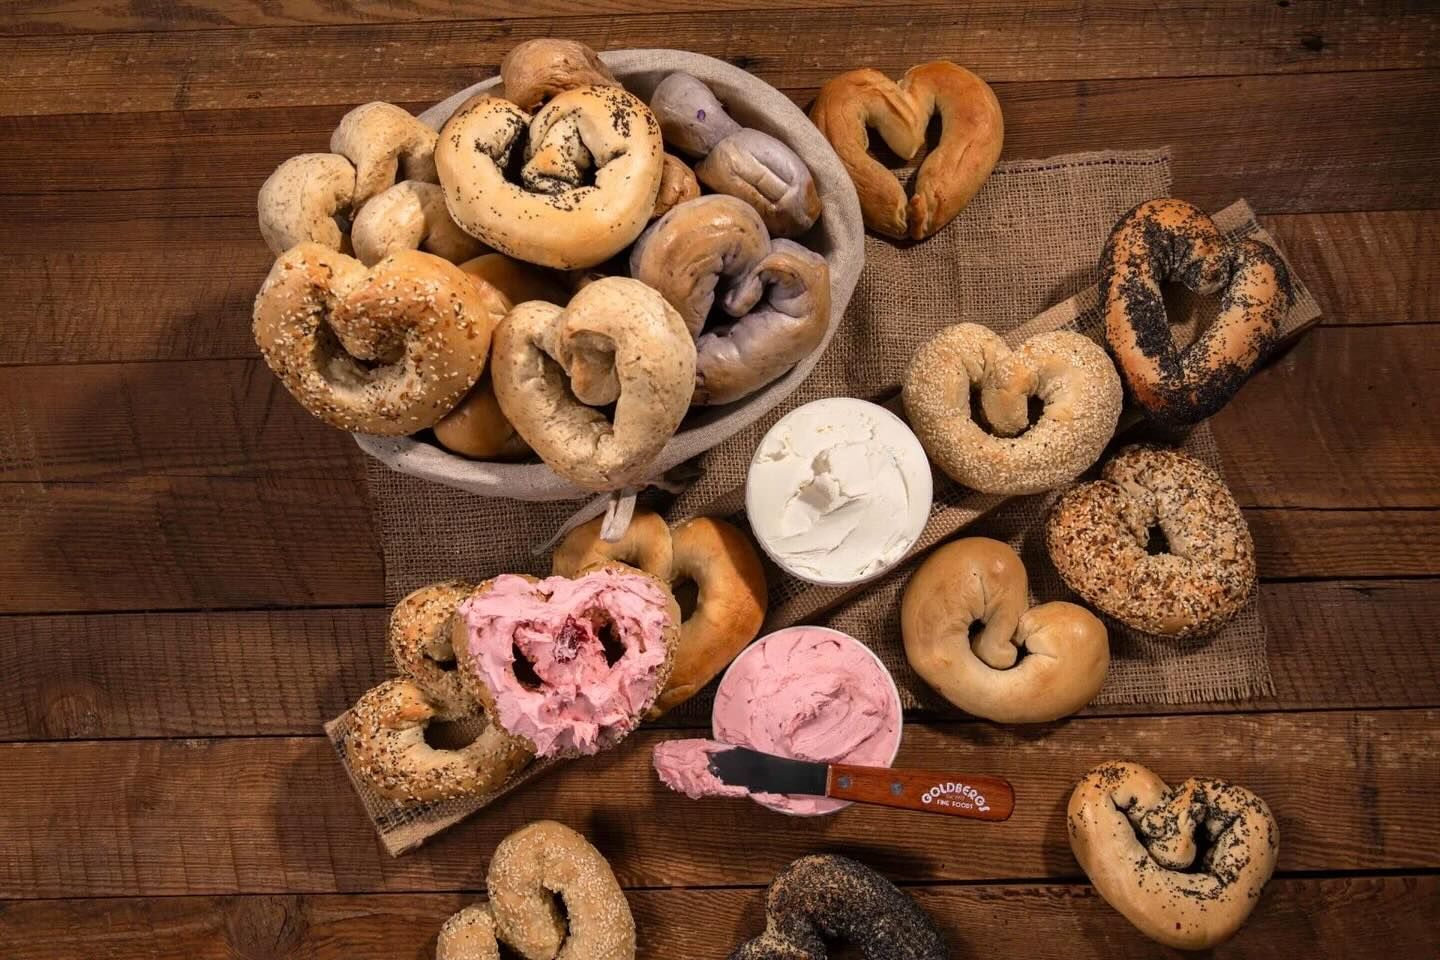 Goldbergs Fine Foods Spreads the Bagel Love This Valentine's Day With Heart Shaped Bagels